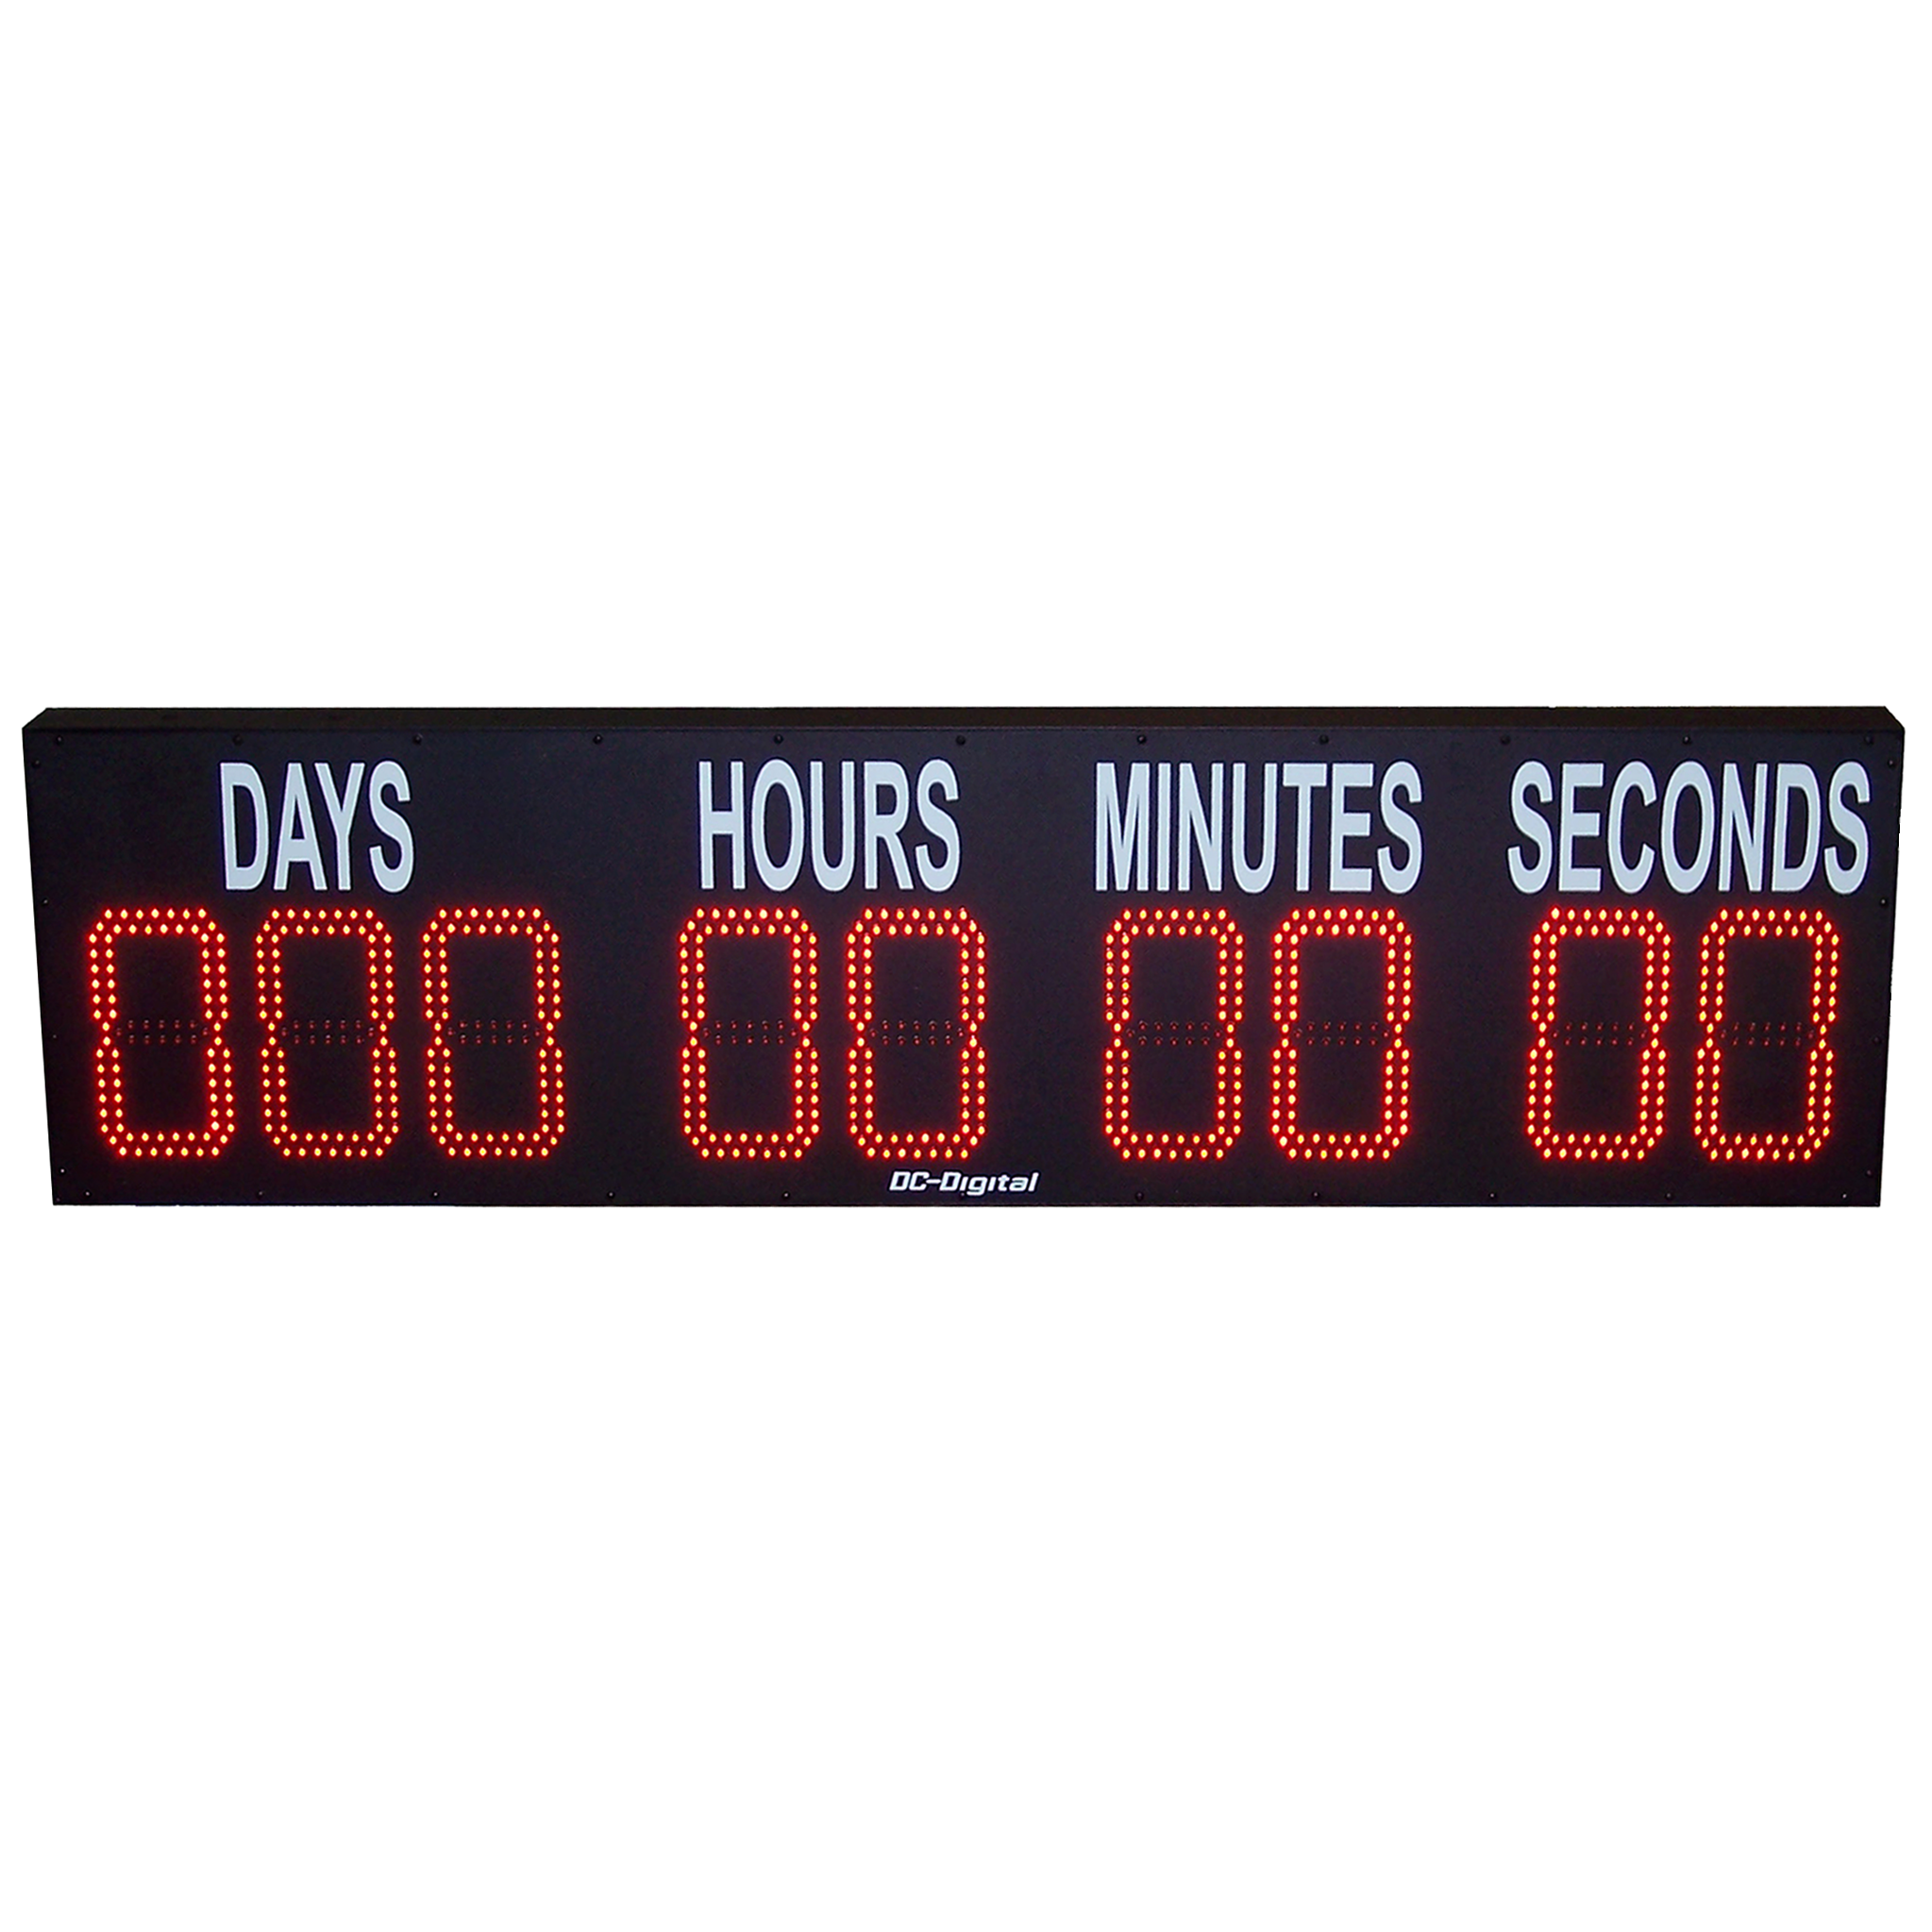 (DC-809T-DN-IN) 8.0 Inch LED Digital, Push-Button Controlled, Countdown Timer, Days, Hours, Minutes, Seconds (INDOOR)